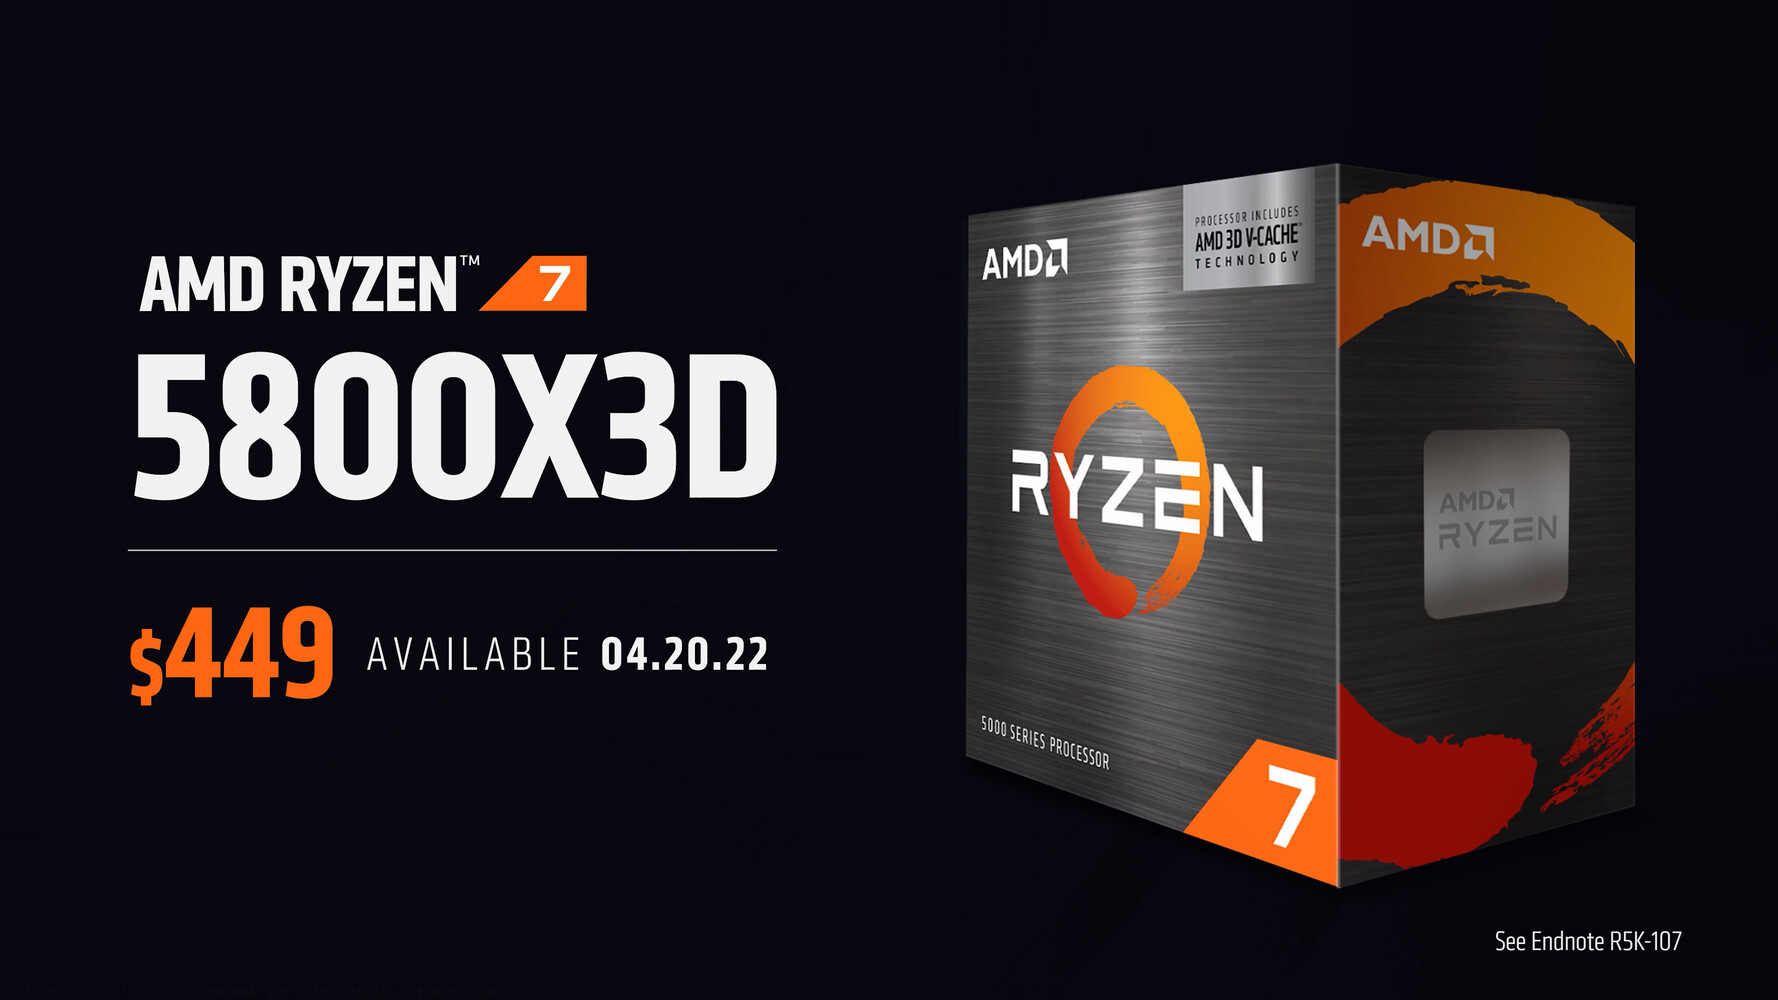 Amd The Ryzen 7 5800x3d Is The Worlds Fastest Gaming Cpu | Hot Sex Picture